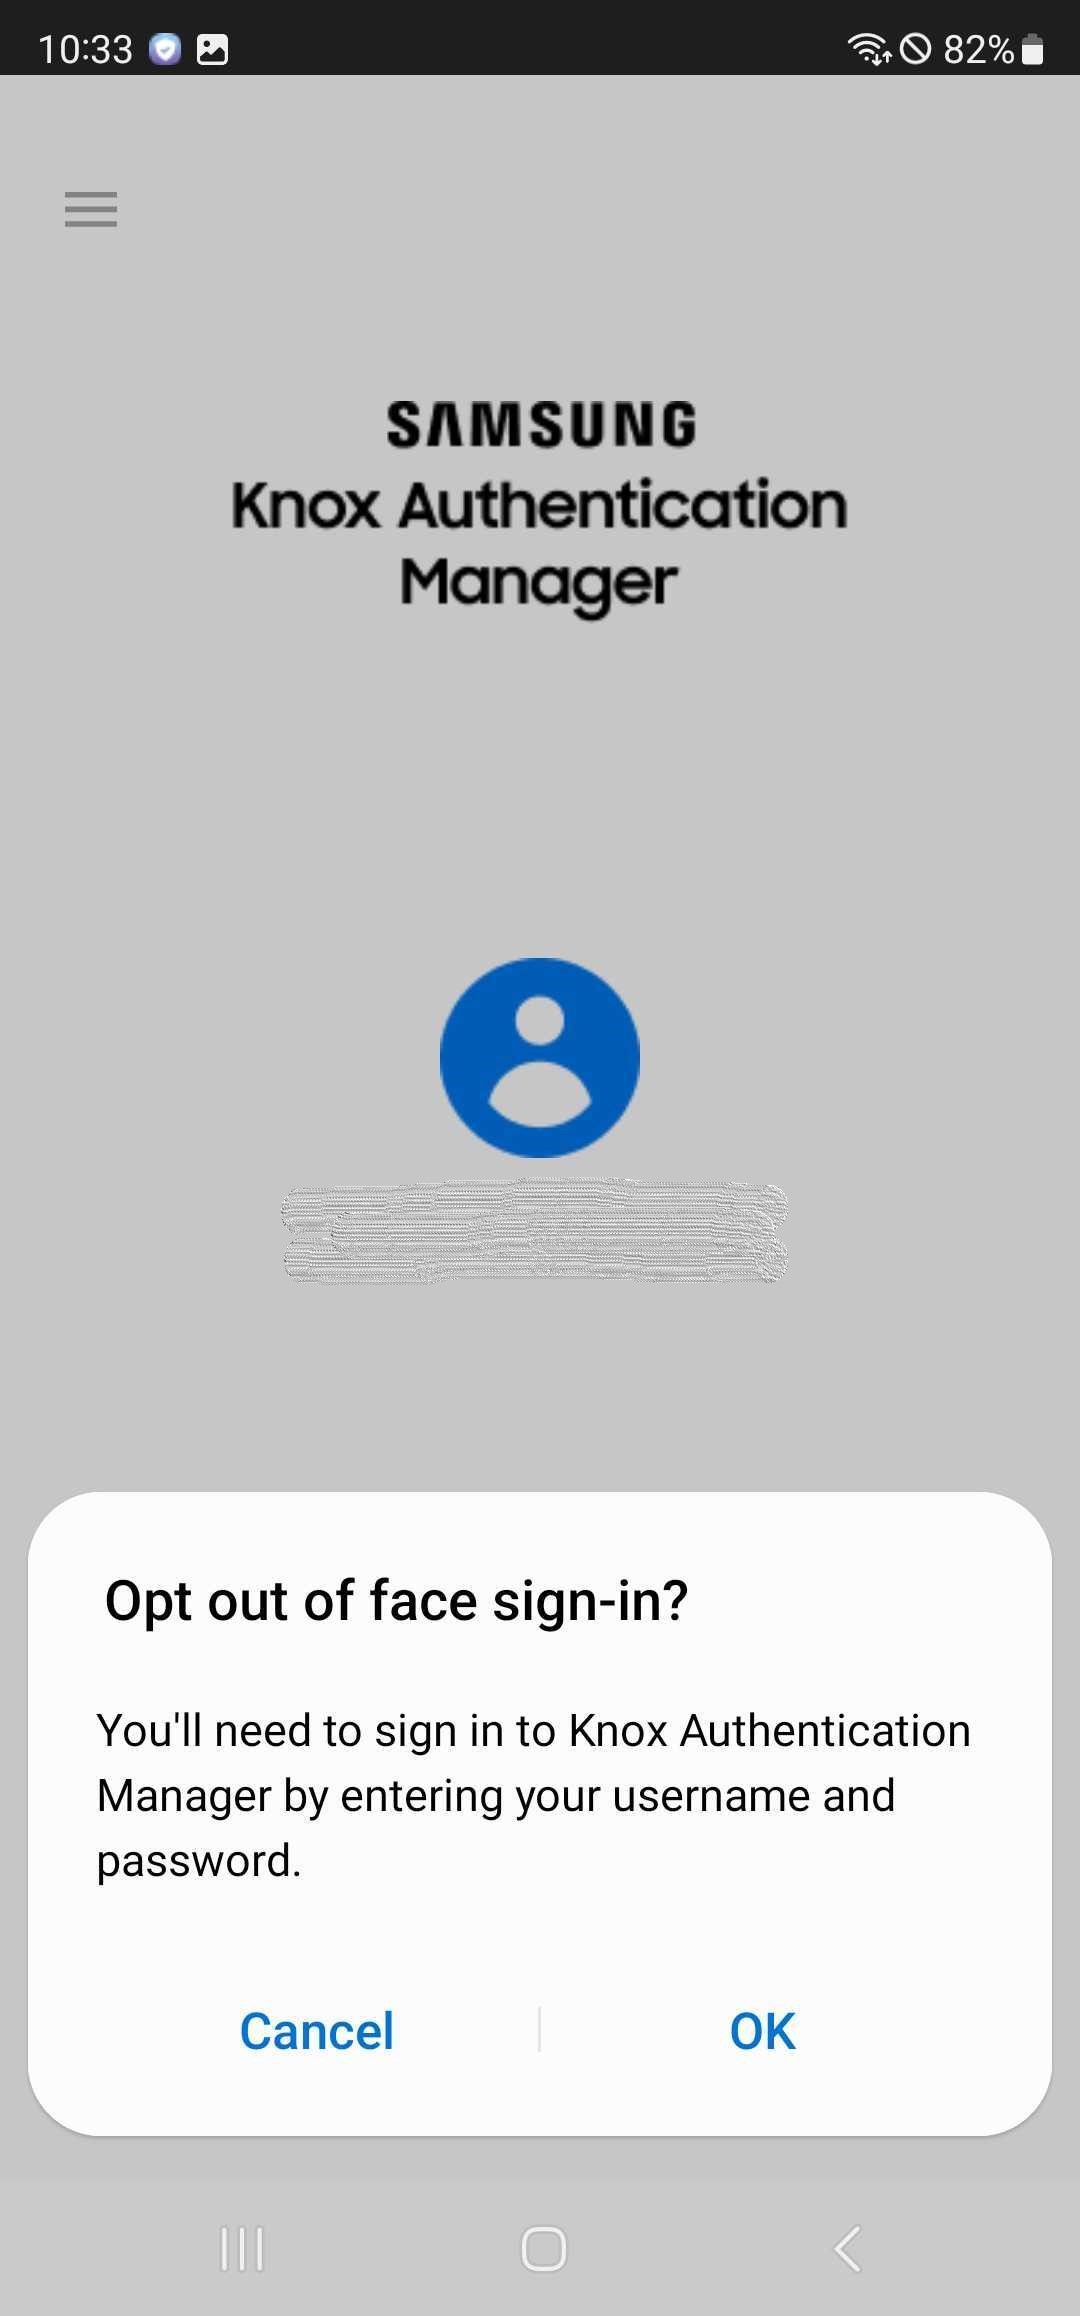 Opt out of face sign-in.